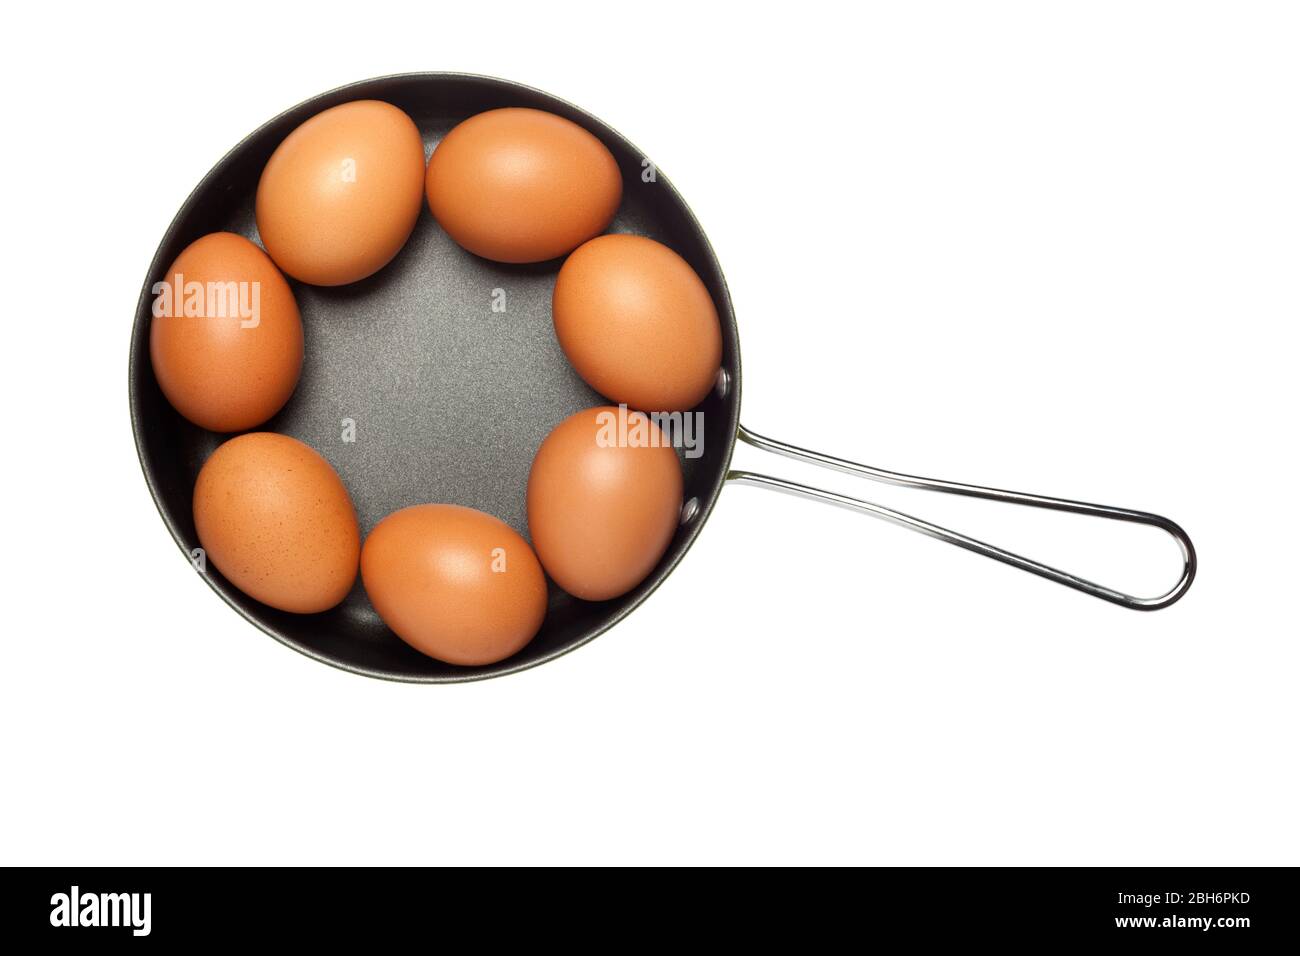 Frying pan with seven eggs arranged in a ring isolated on white background Stock Photo